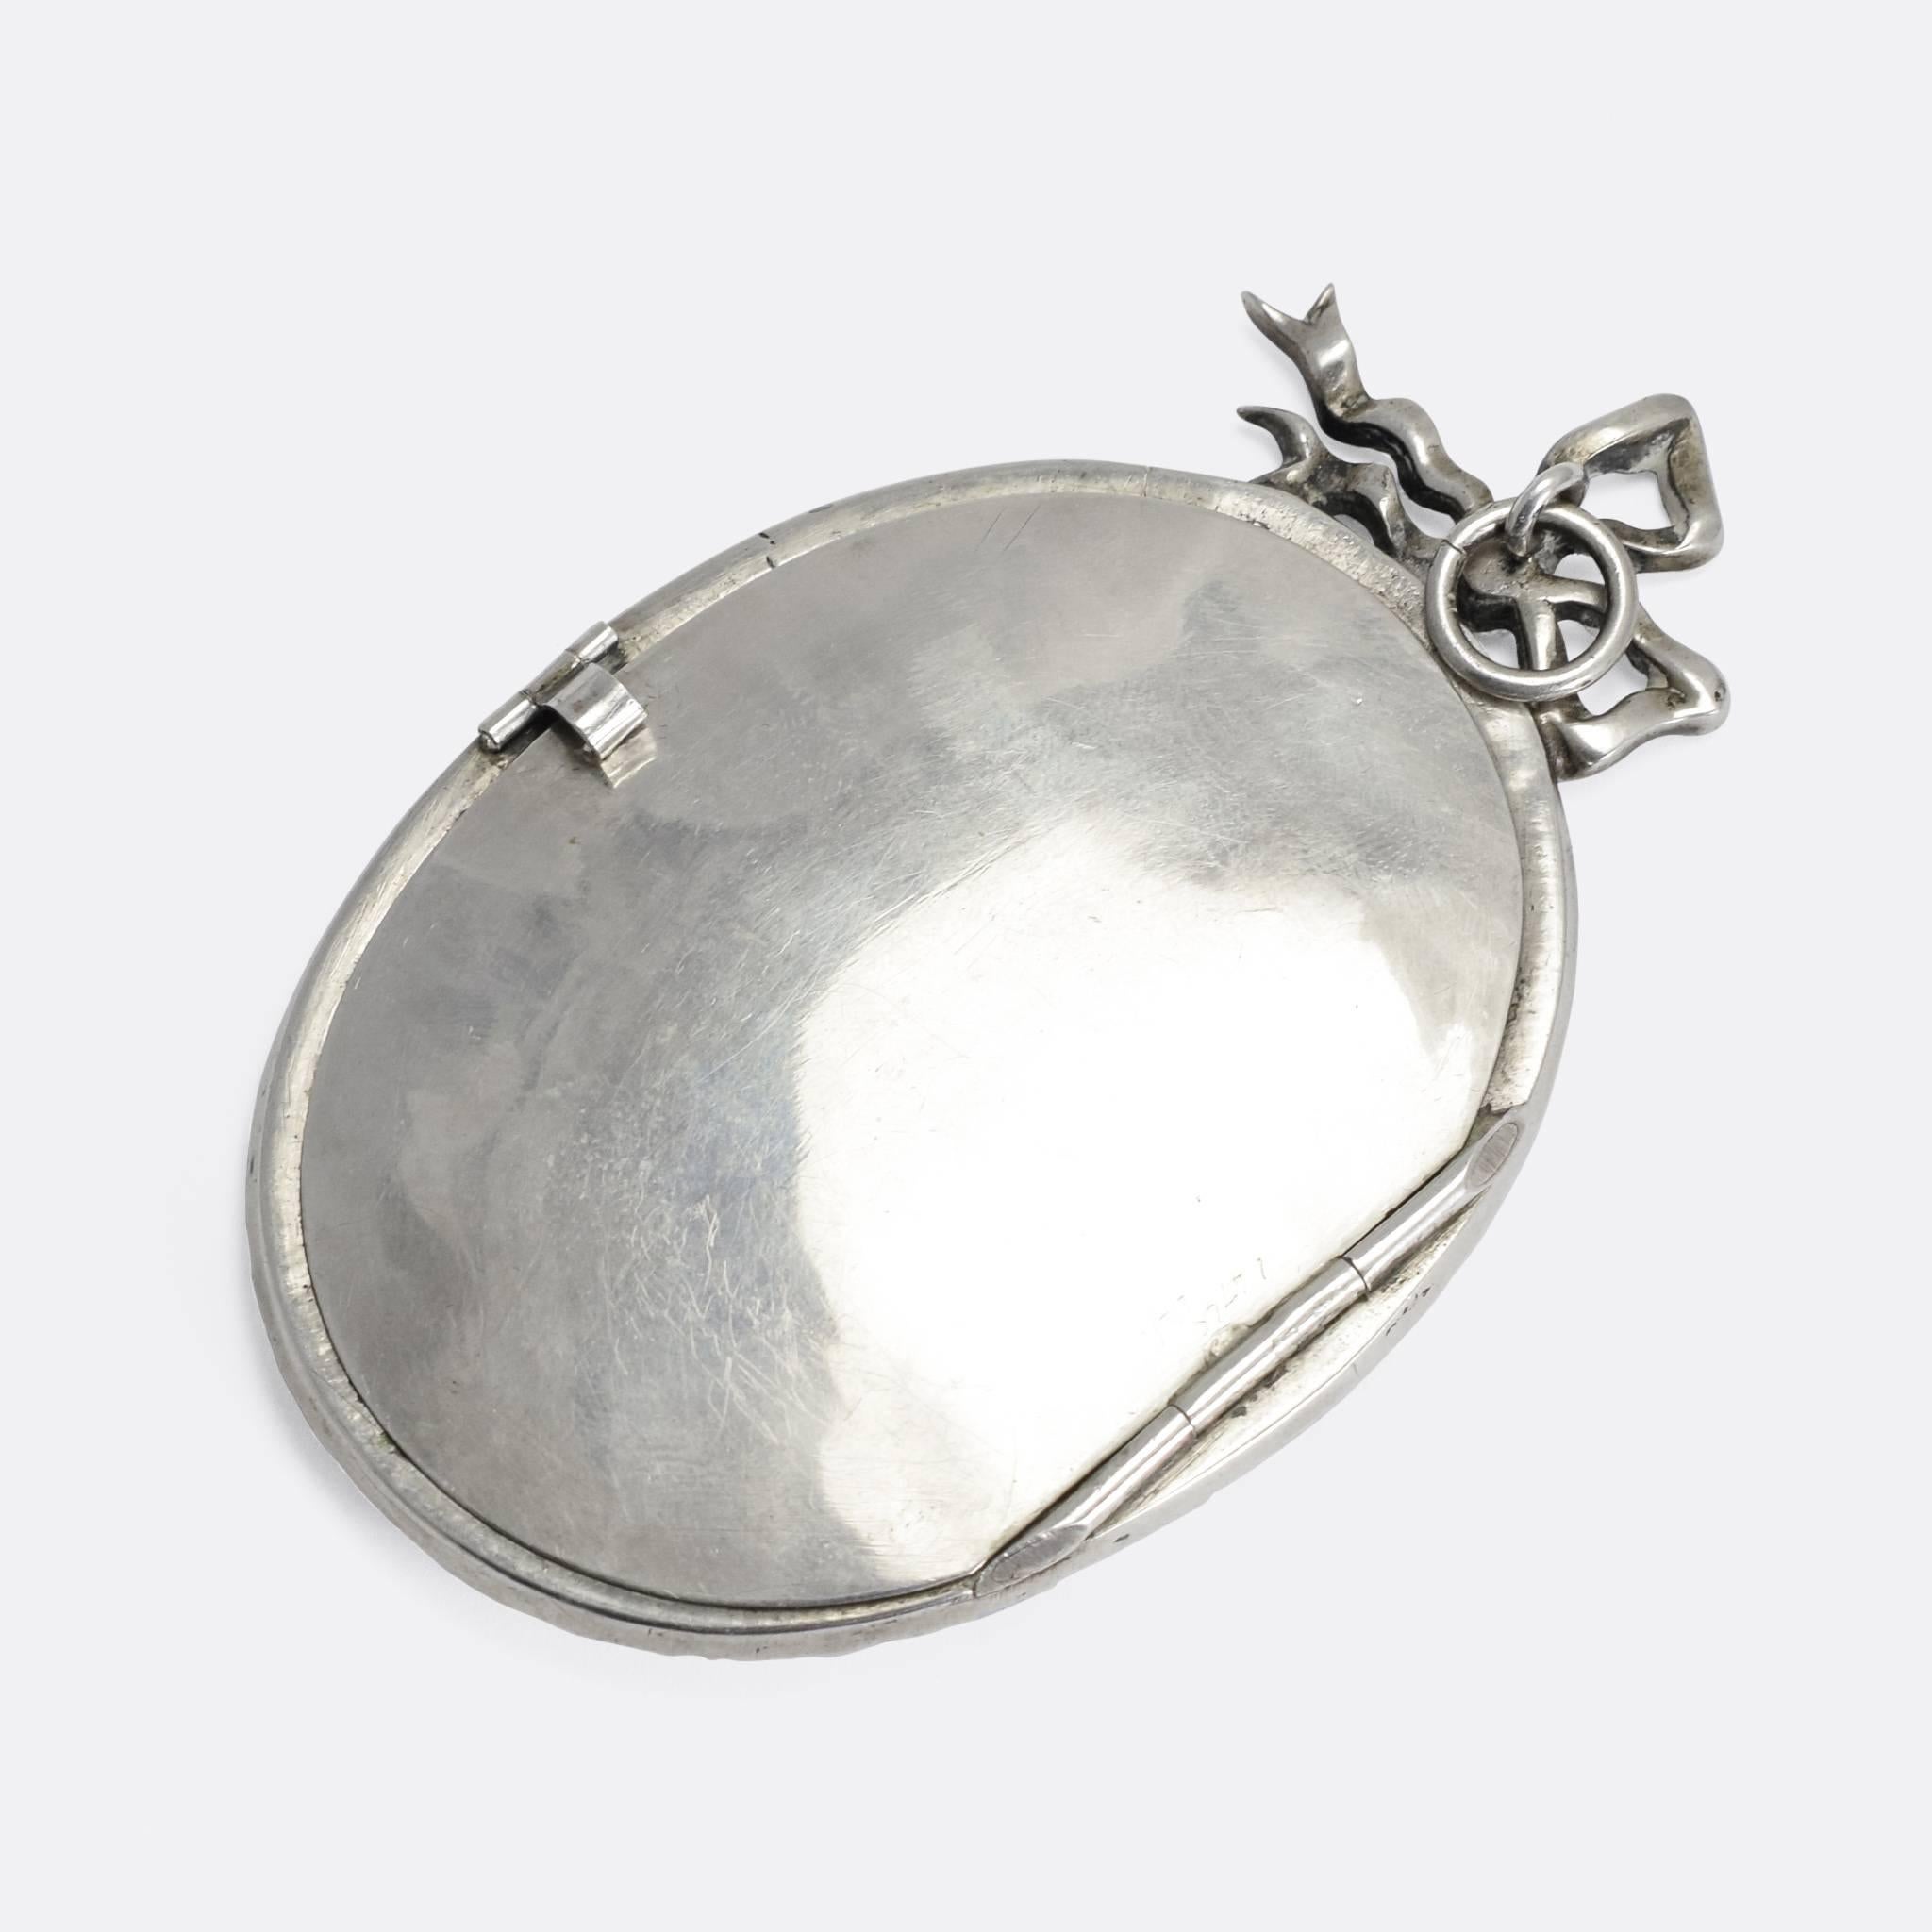 An oversized antique locket dating to c.1880. Modelled in Sterling silver throughout, this large scale piece features a border of white paste gemstones, and an offset bow at the top. The back opens up, allowing for the display of a photograph or